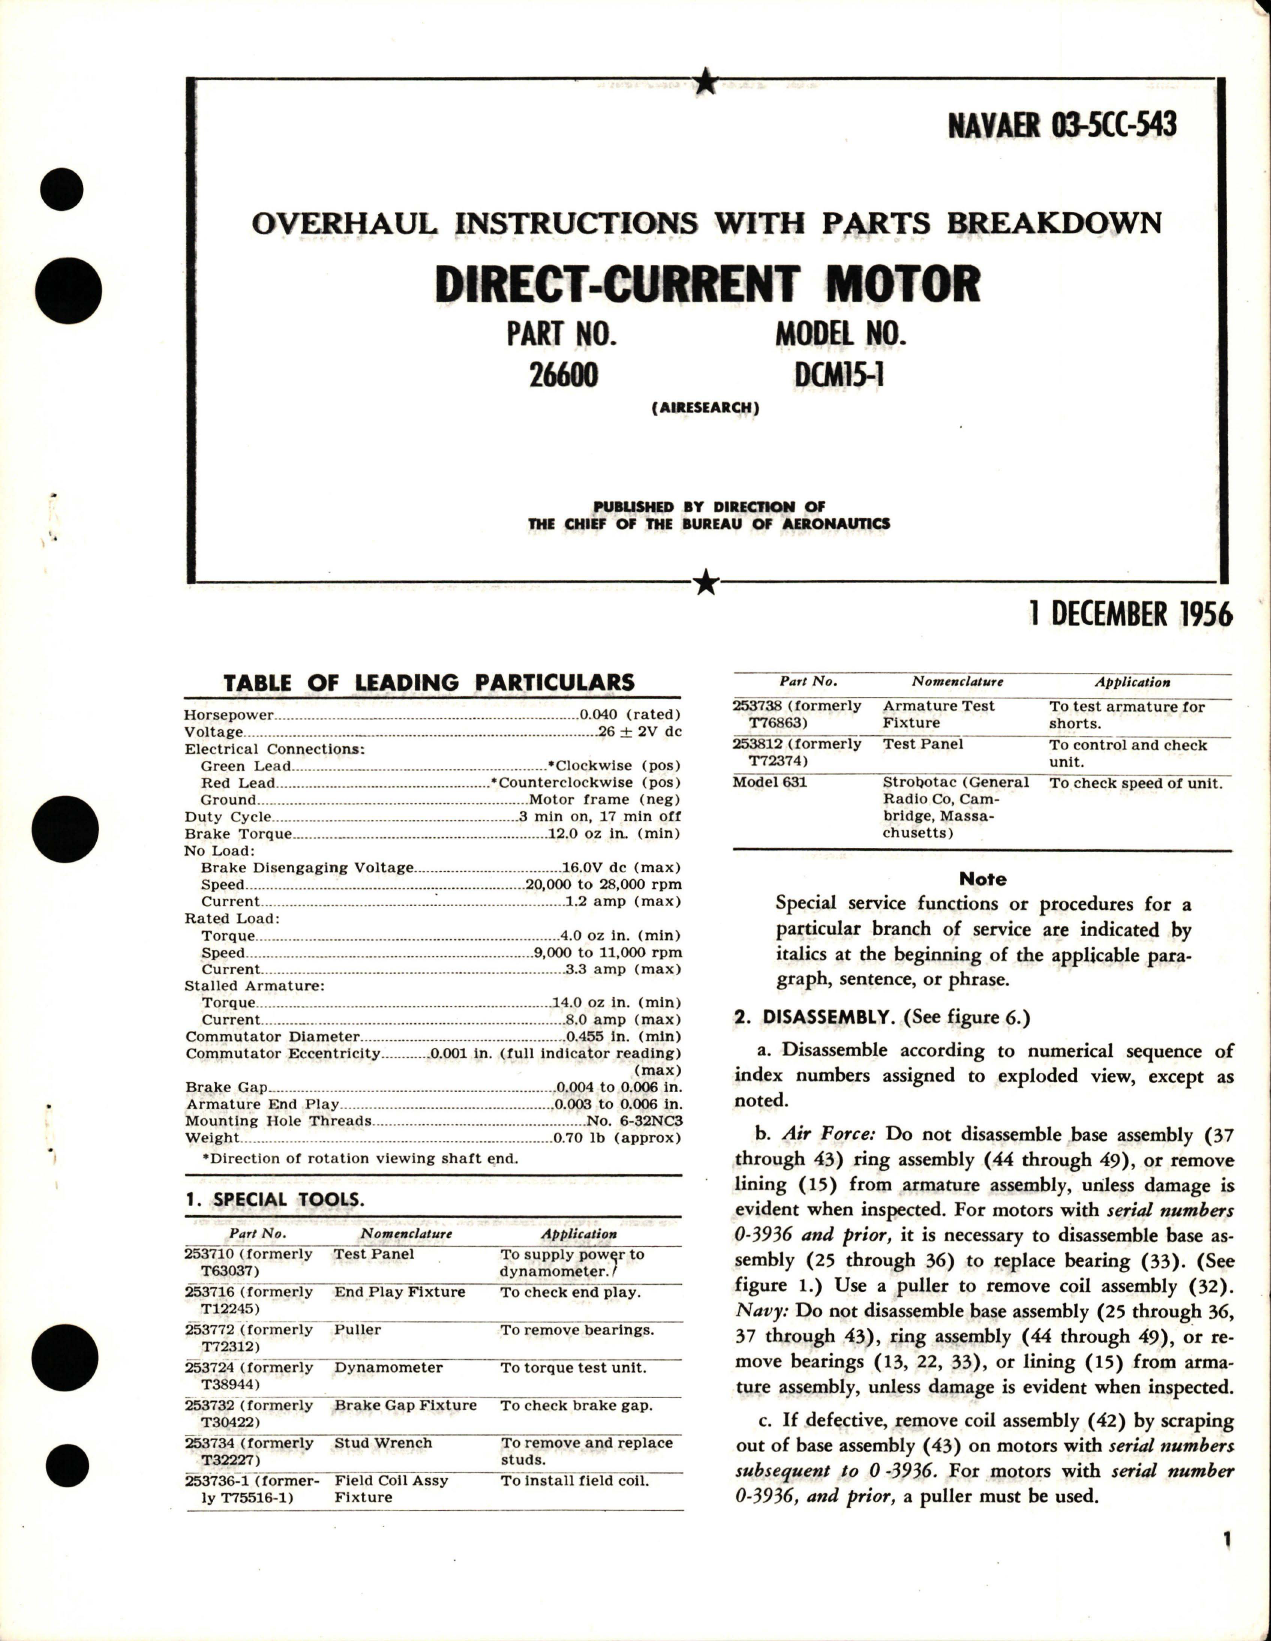 Sample page 1 from AirCorps Library document: Overhaul Instructions with Parts Breakdown for Direct-Current Motor- Part 26600 - Model DCM15-1